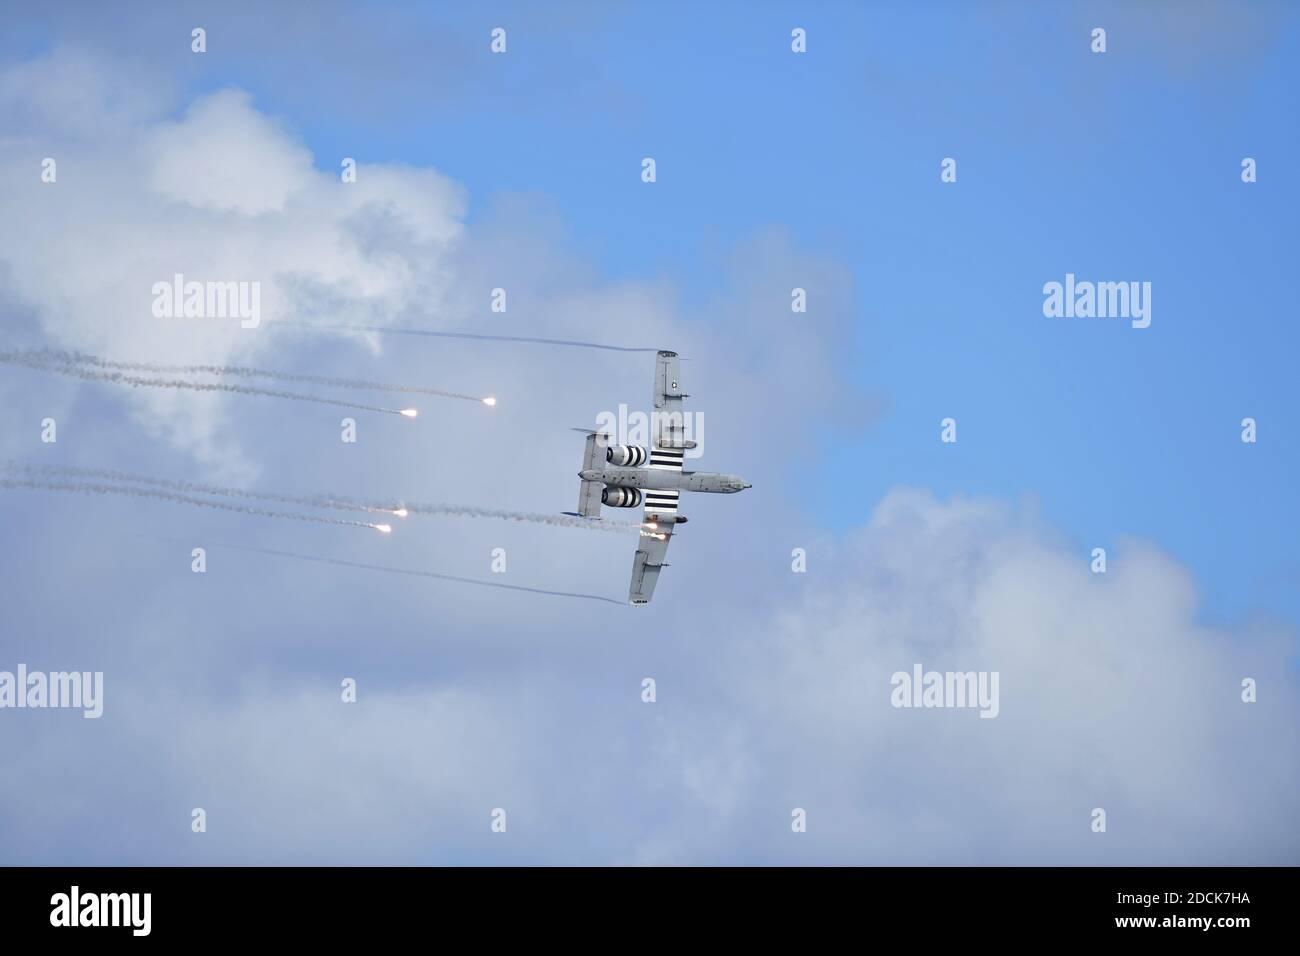 Fort Lauderdale, FL, USA. 21st Nov, 2020. A-10 Warthog Thunderbolt II Demo Team performs in the Fort Lauderdale Air Show on November 21, 2020 in Fort Lauderdale, Florida People: A-10 Warthog Thunderbolt II Demo Team Credit: Hoo Me/Media Punch/Alamy Live News Stock Photo